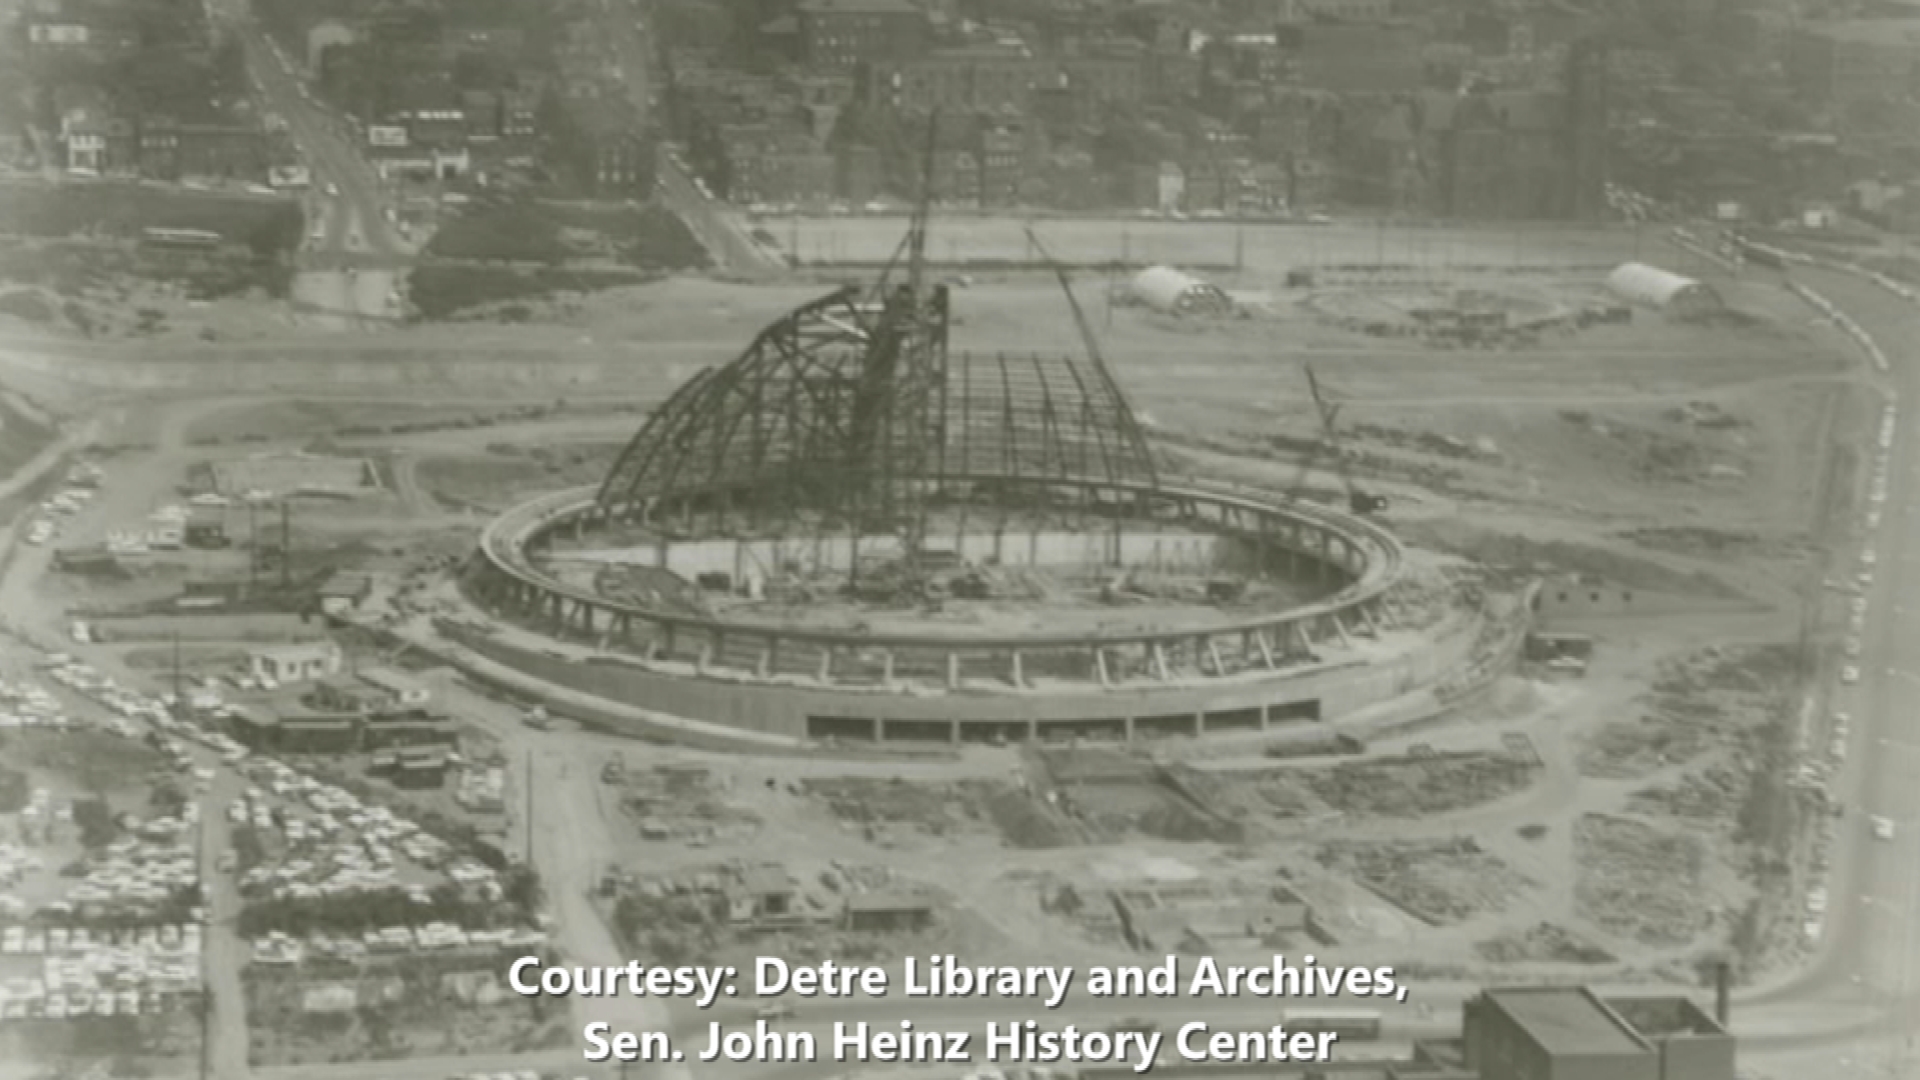 The Civic Arena in Pittsburgh with the Roof opening 1963